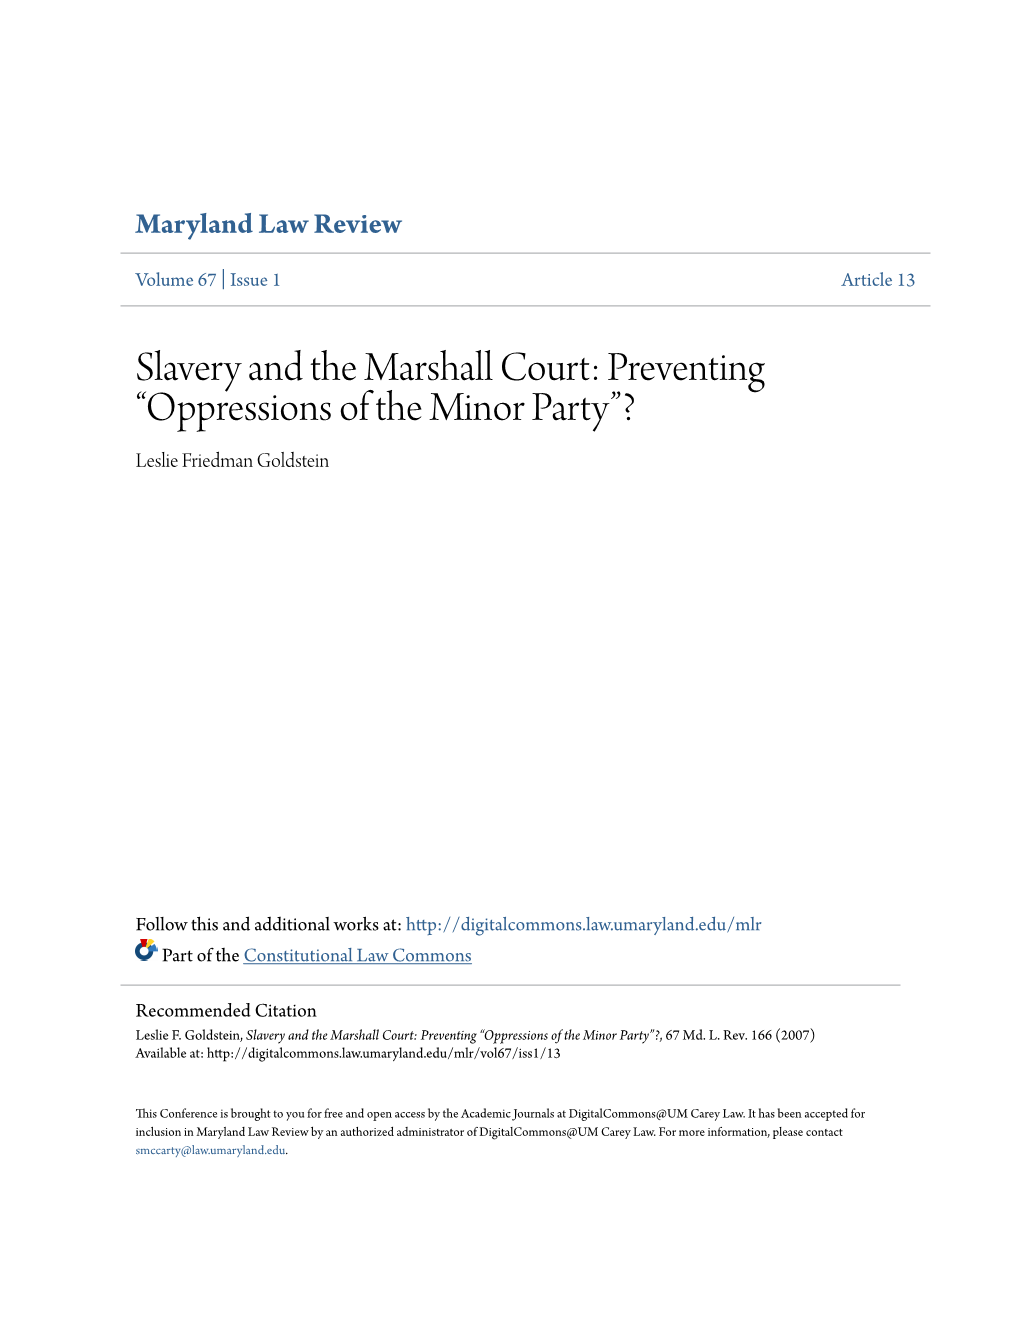 Slavery and the Marshall Court: Preventing “Oppressions of the Minor Party”? Leslie Friedman Goldstein